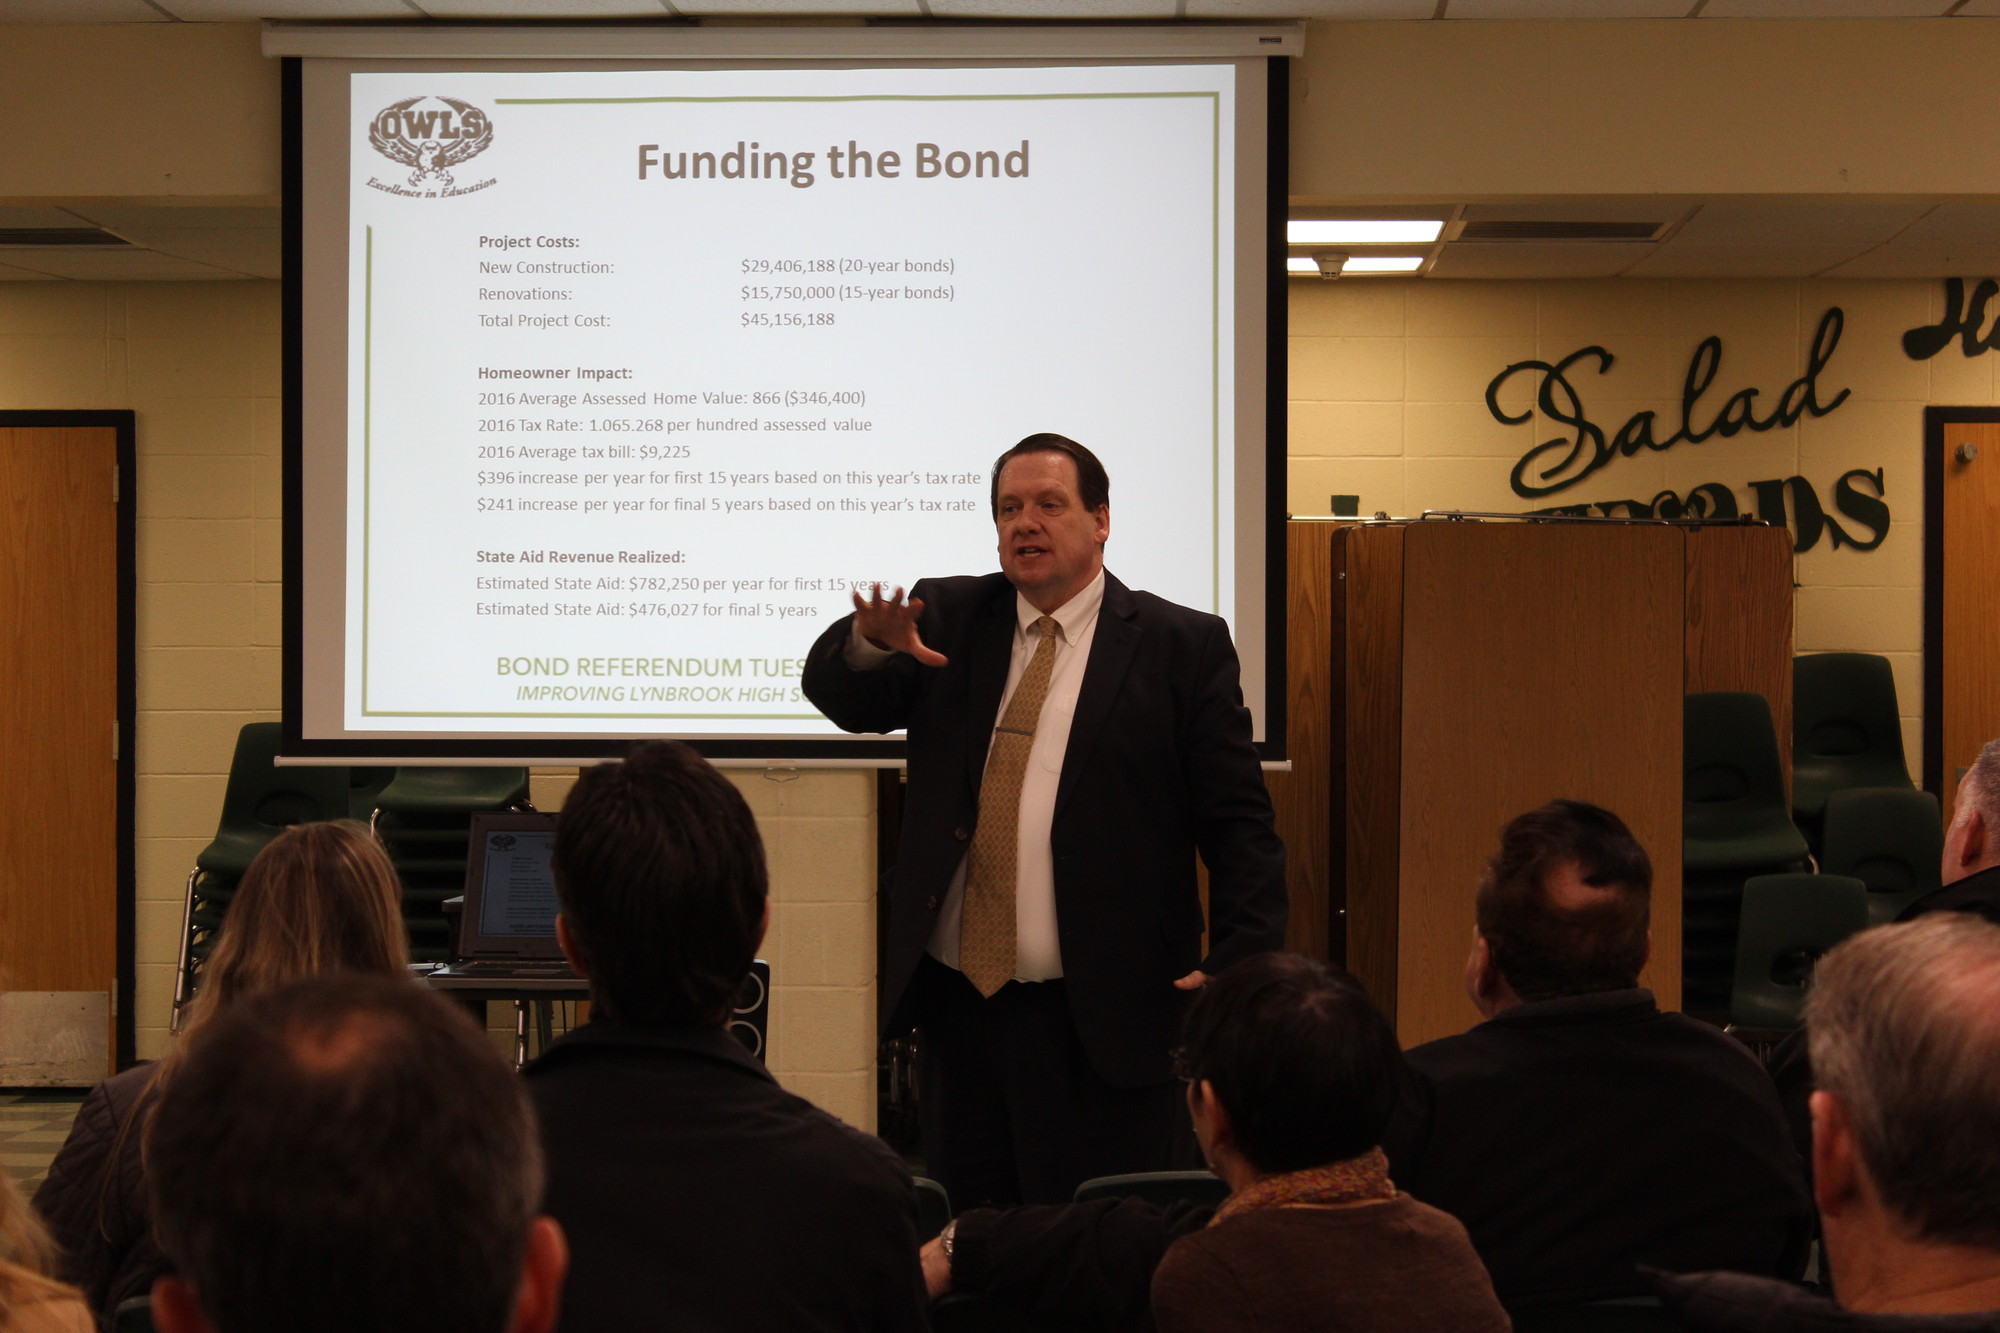 Paul Lynch, the assistant superintendent for finance, operations, and information systems, briefly explained how the $45 million bond is calculated before taking questions from the audience.